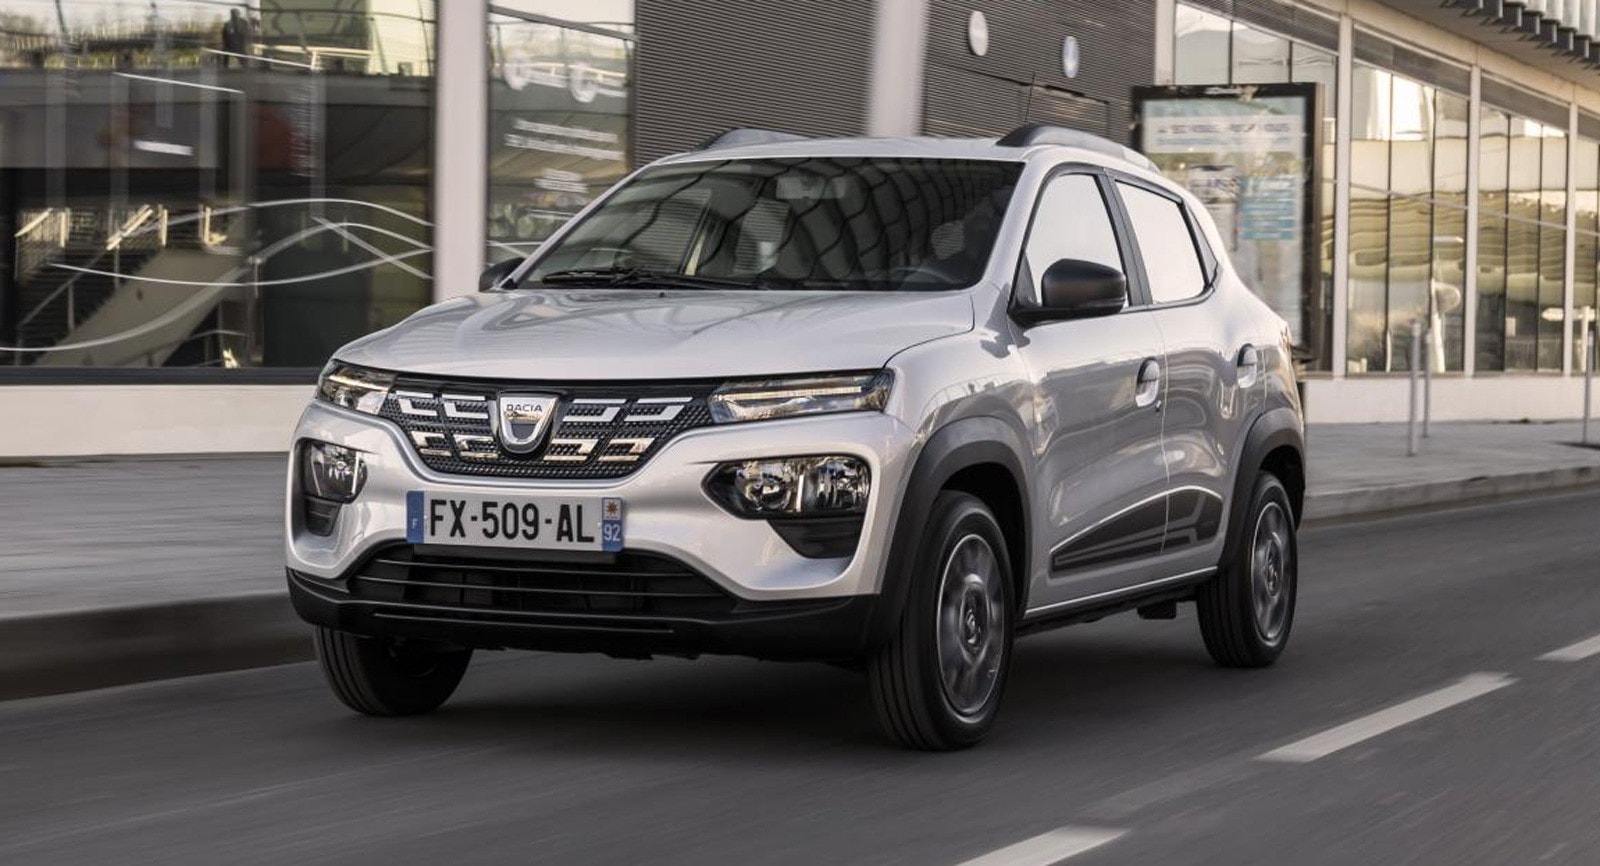 https://s1.cdn.autoevolution.com/images/news/base-2021-dacia-spring-ev-is-an-absolute-bargain-in-germany-165422_1.jpg